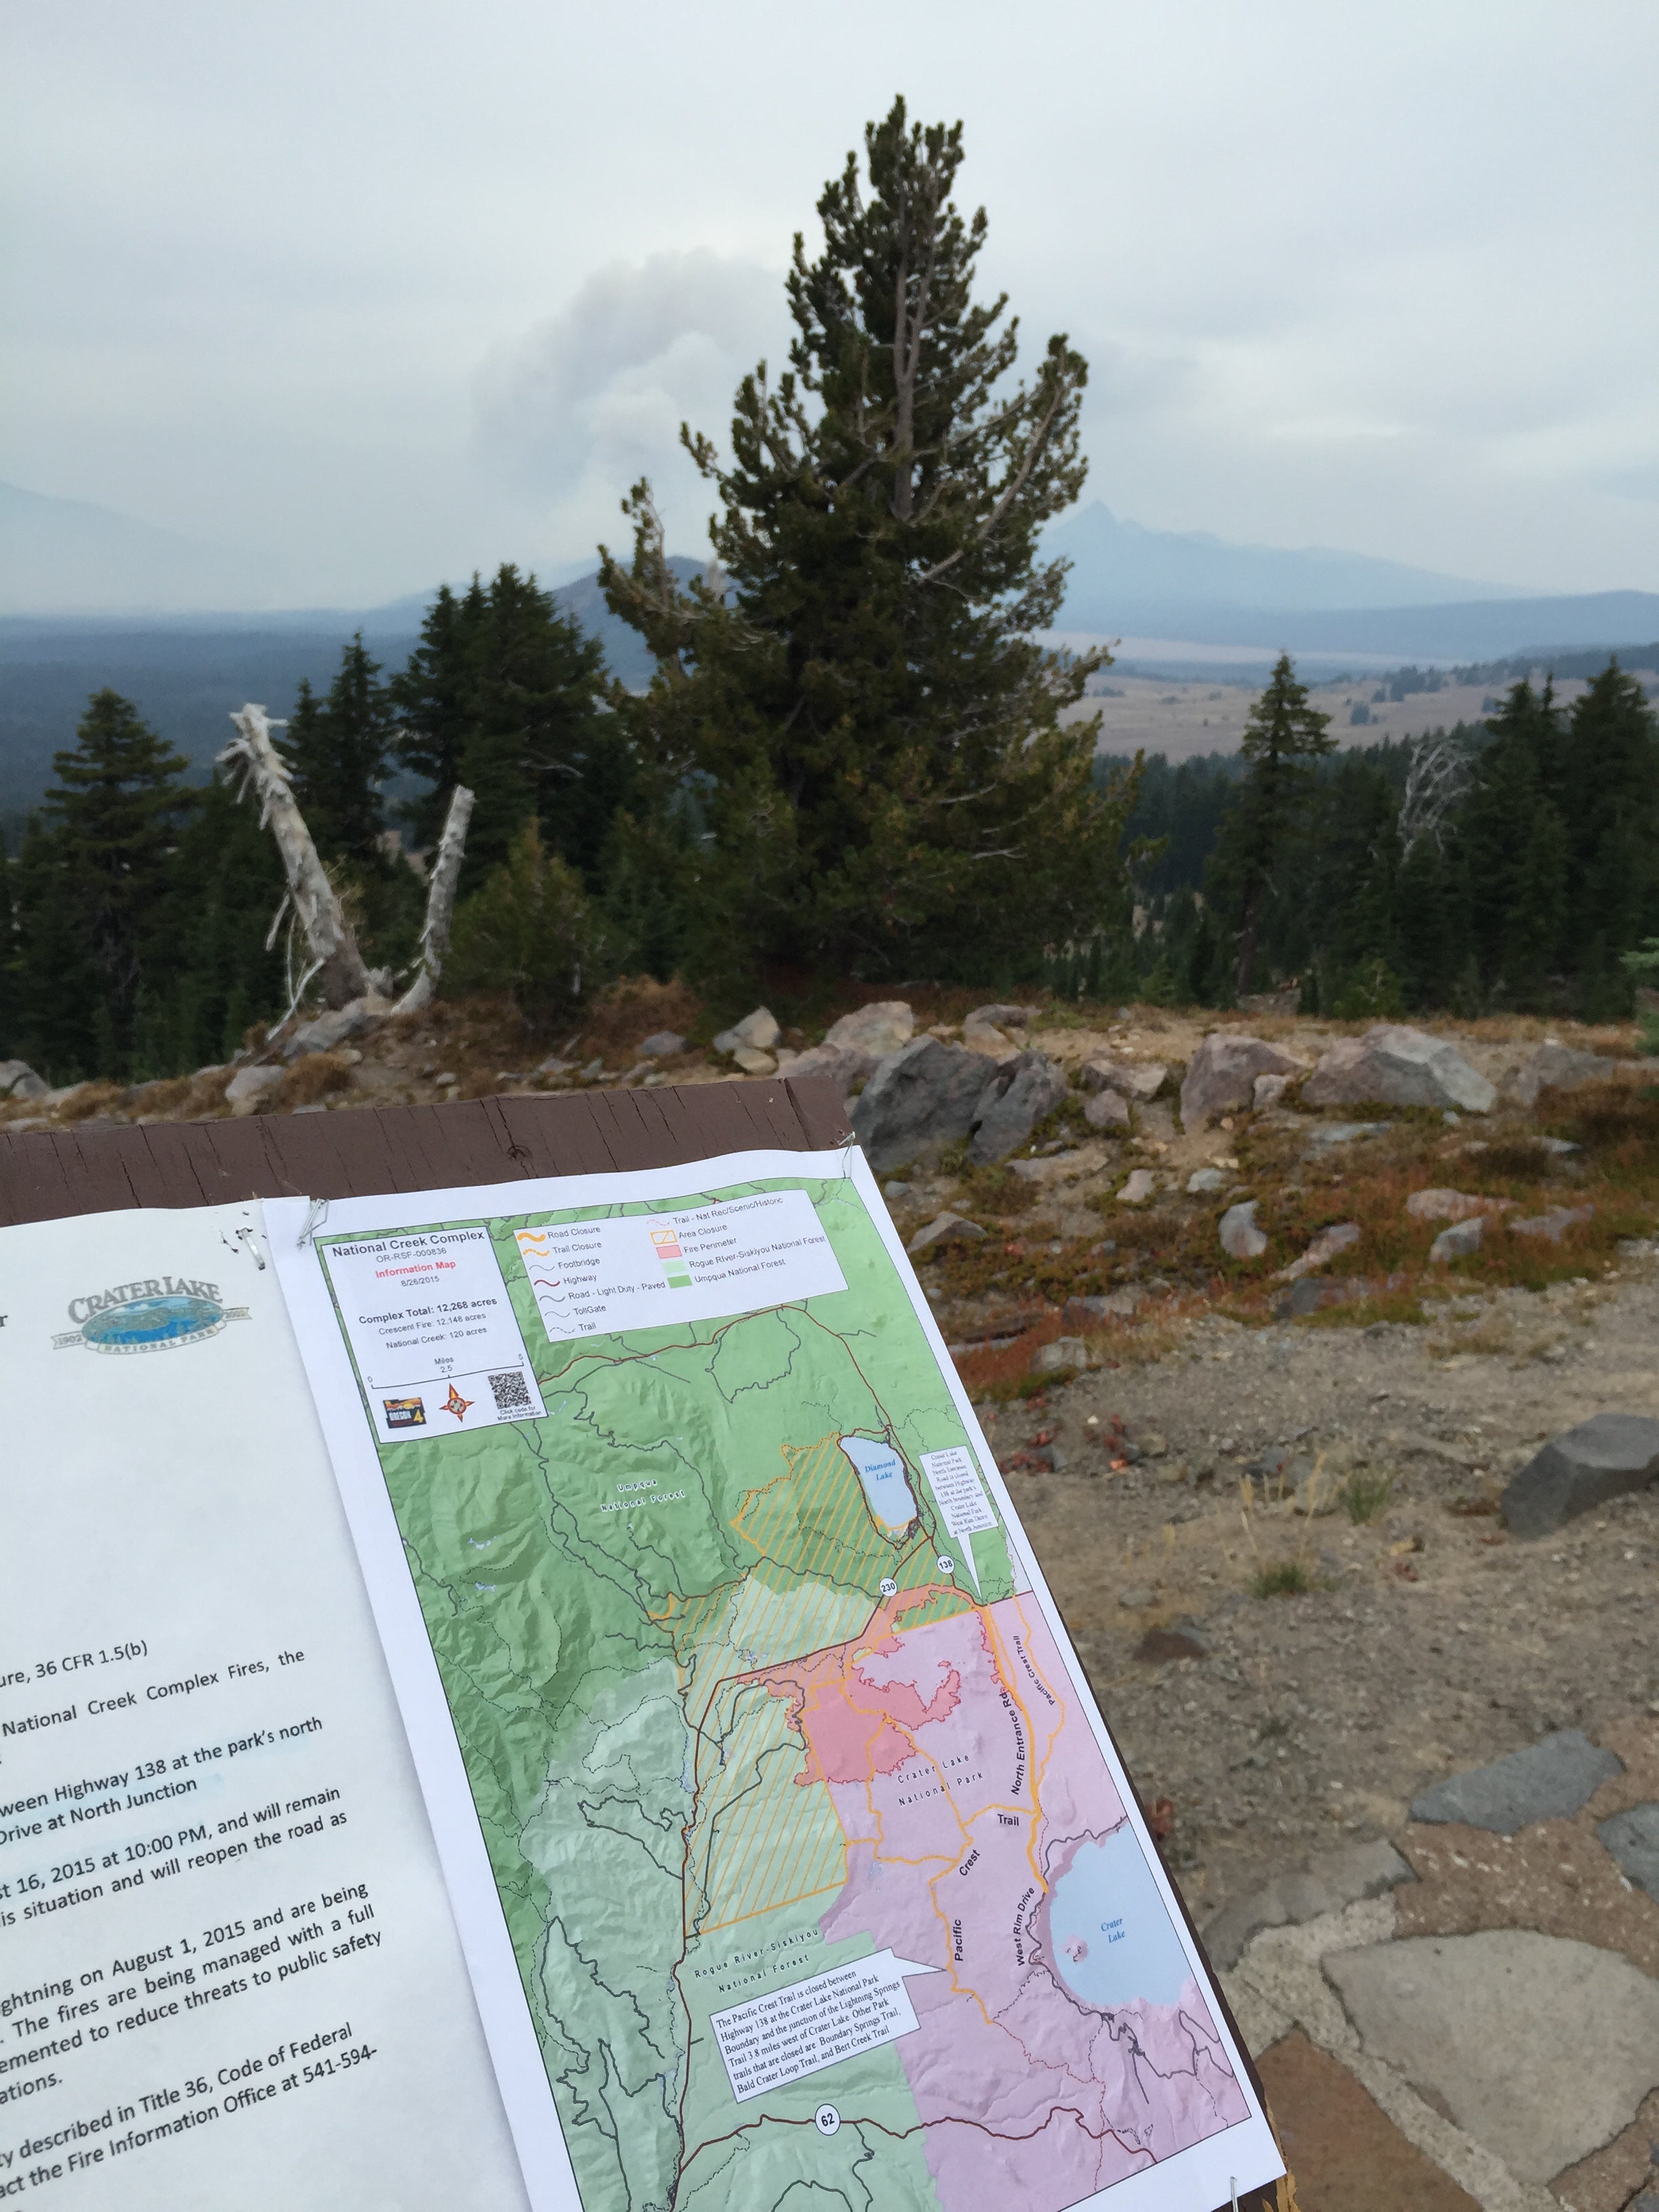 Check the fire maps carefully for road and hike closures